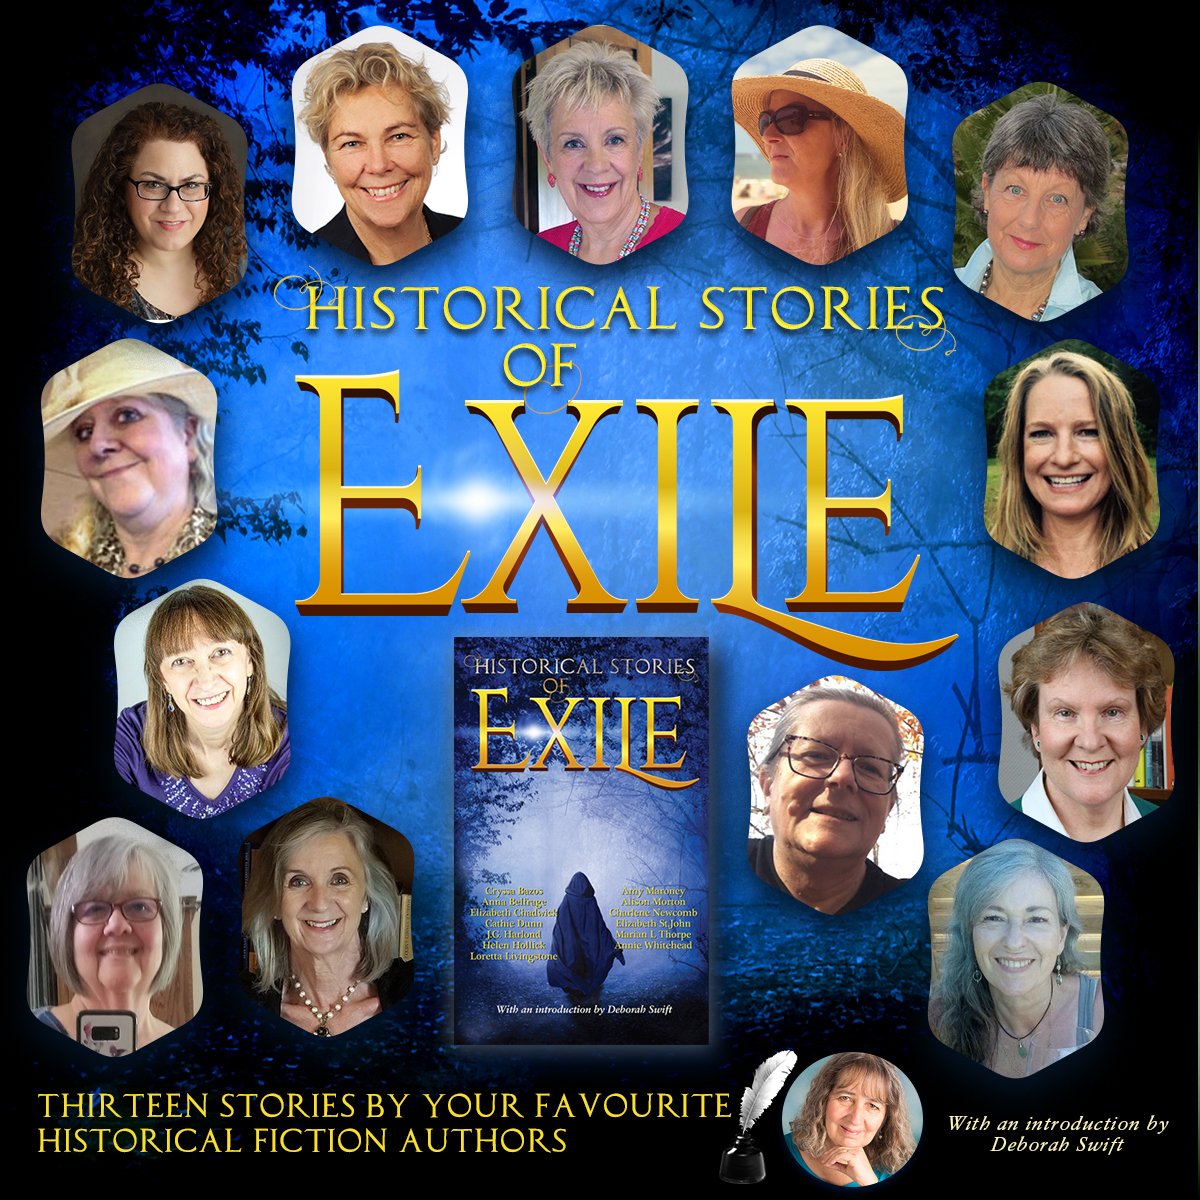 Today is release day for Historical Stories of Exile, an anthology penned by 13 great historical fiction authors.
adarngoodread.blogspot.com/2023/11/histor…
@HelenHollick @cathiedunn #ExileAnthology #HistoricalFiction #Exile #NewRelease #BookBlast #TheCoffeePotBookClub